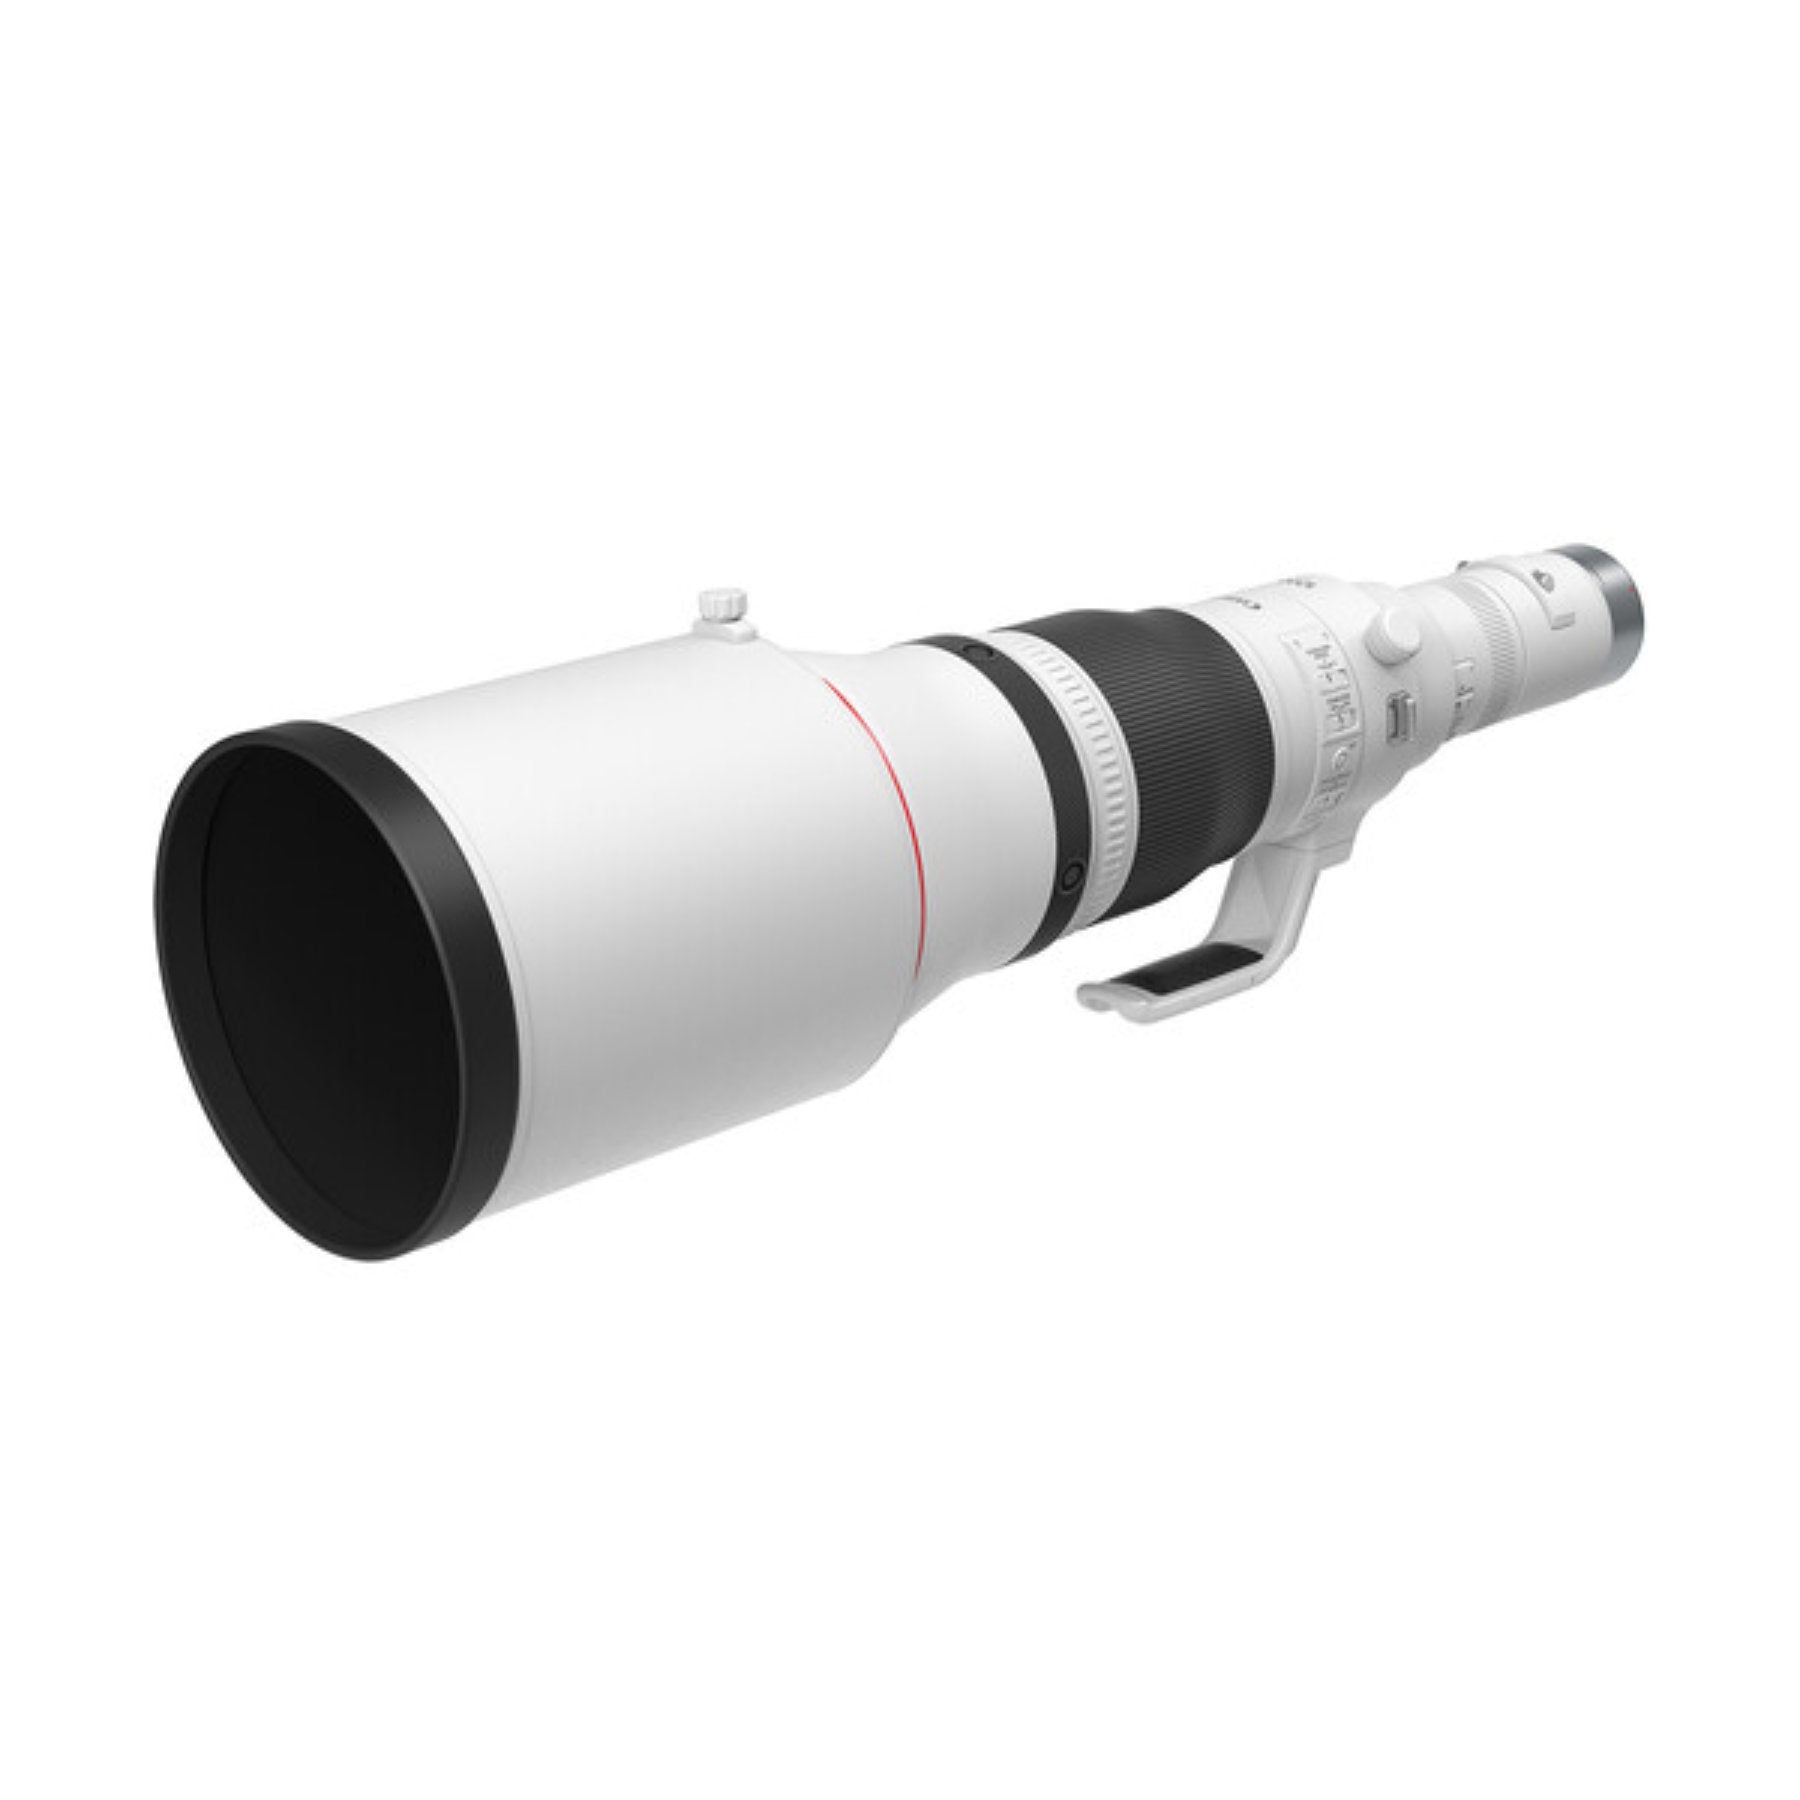 Buy Canon RF 1200mm f/8L IS USM RF Mount Lens at Topic StoreBuy Canon RF 1200mm f/8L IS USM RF Mount Lens at Topic Store